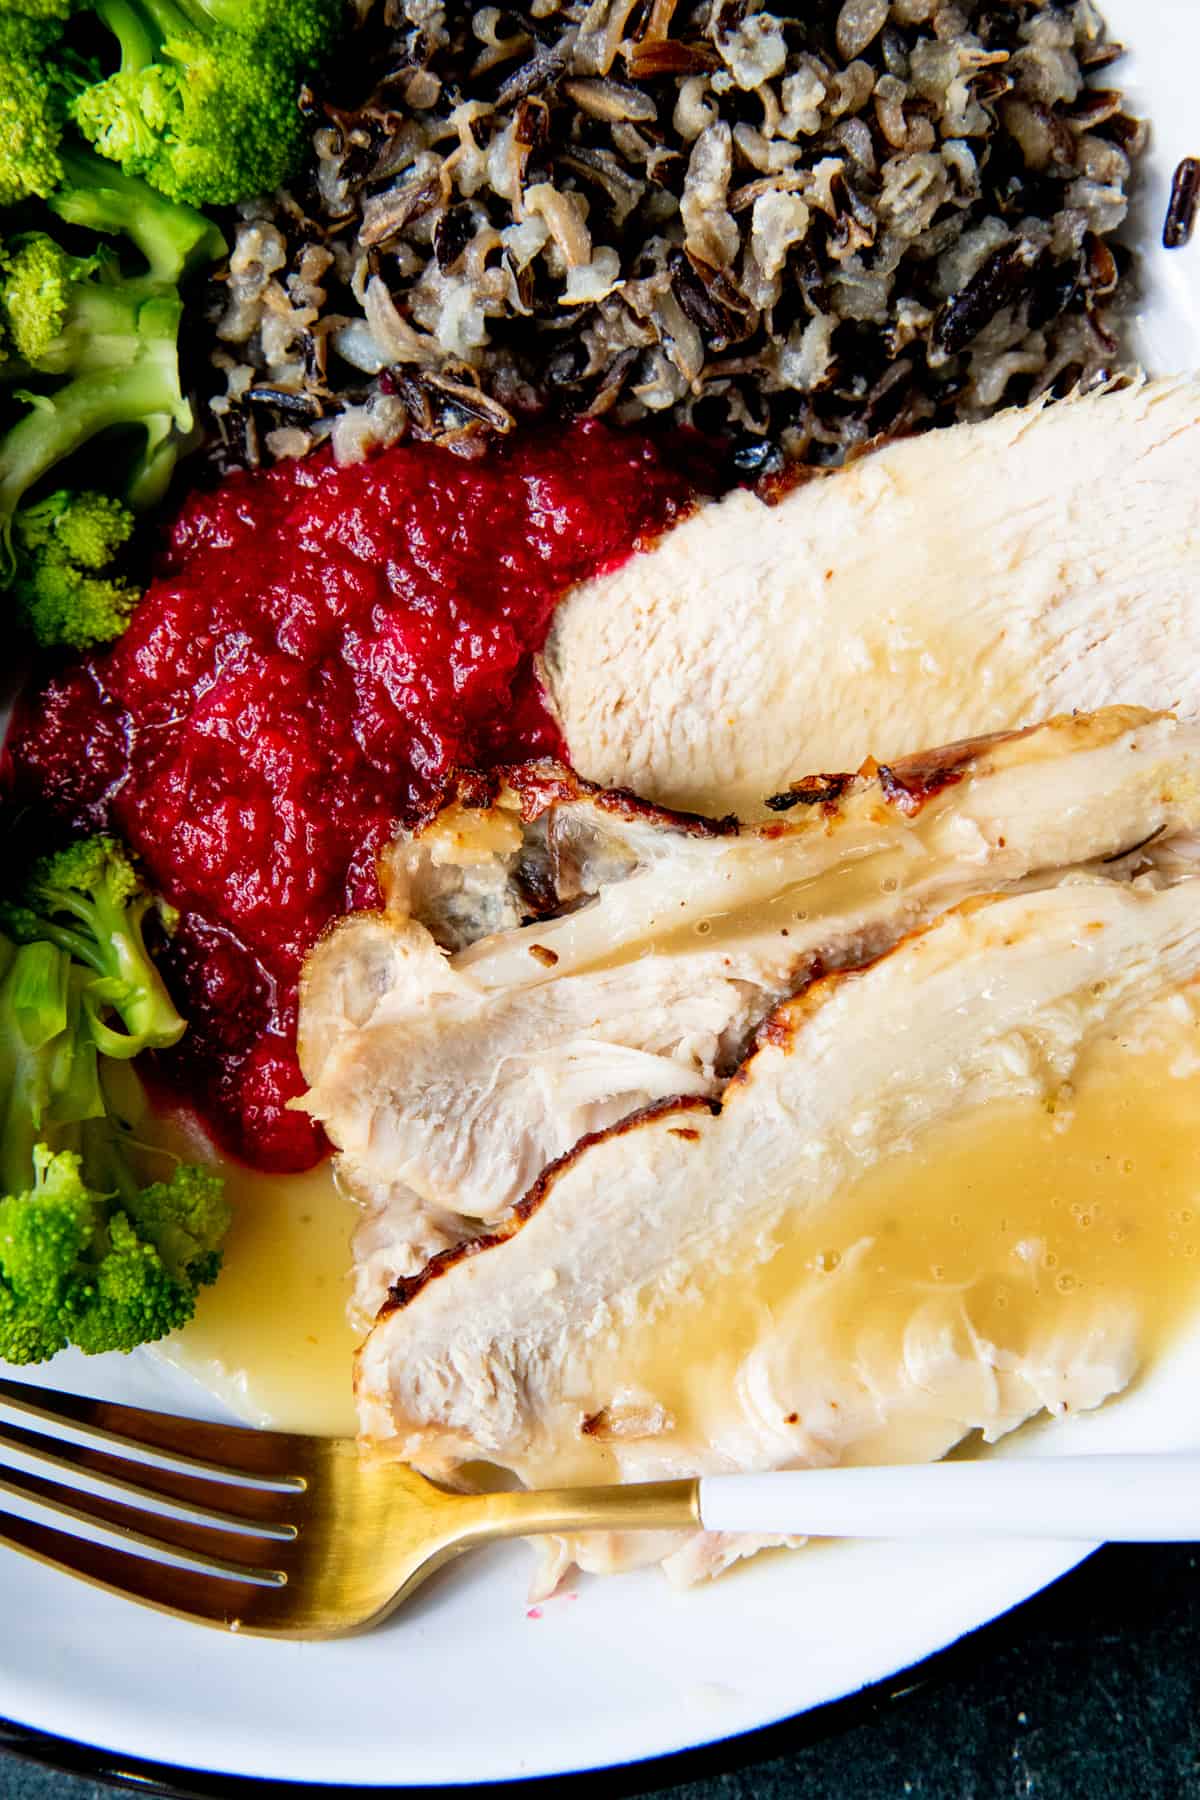 Slices of turkey covered in gravy, next to piles of Thanksgiving side dishes, such as broccoli and cranberry applesauce.